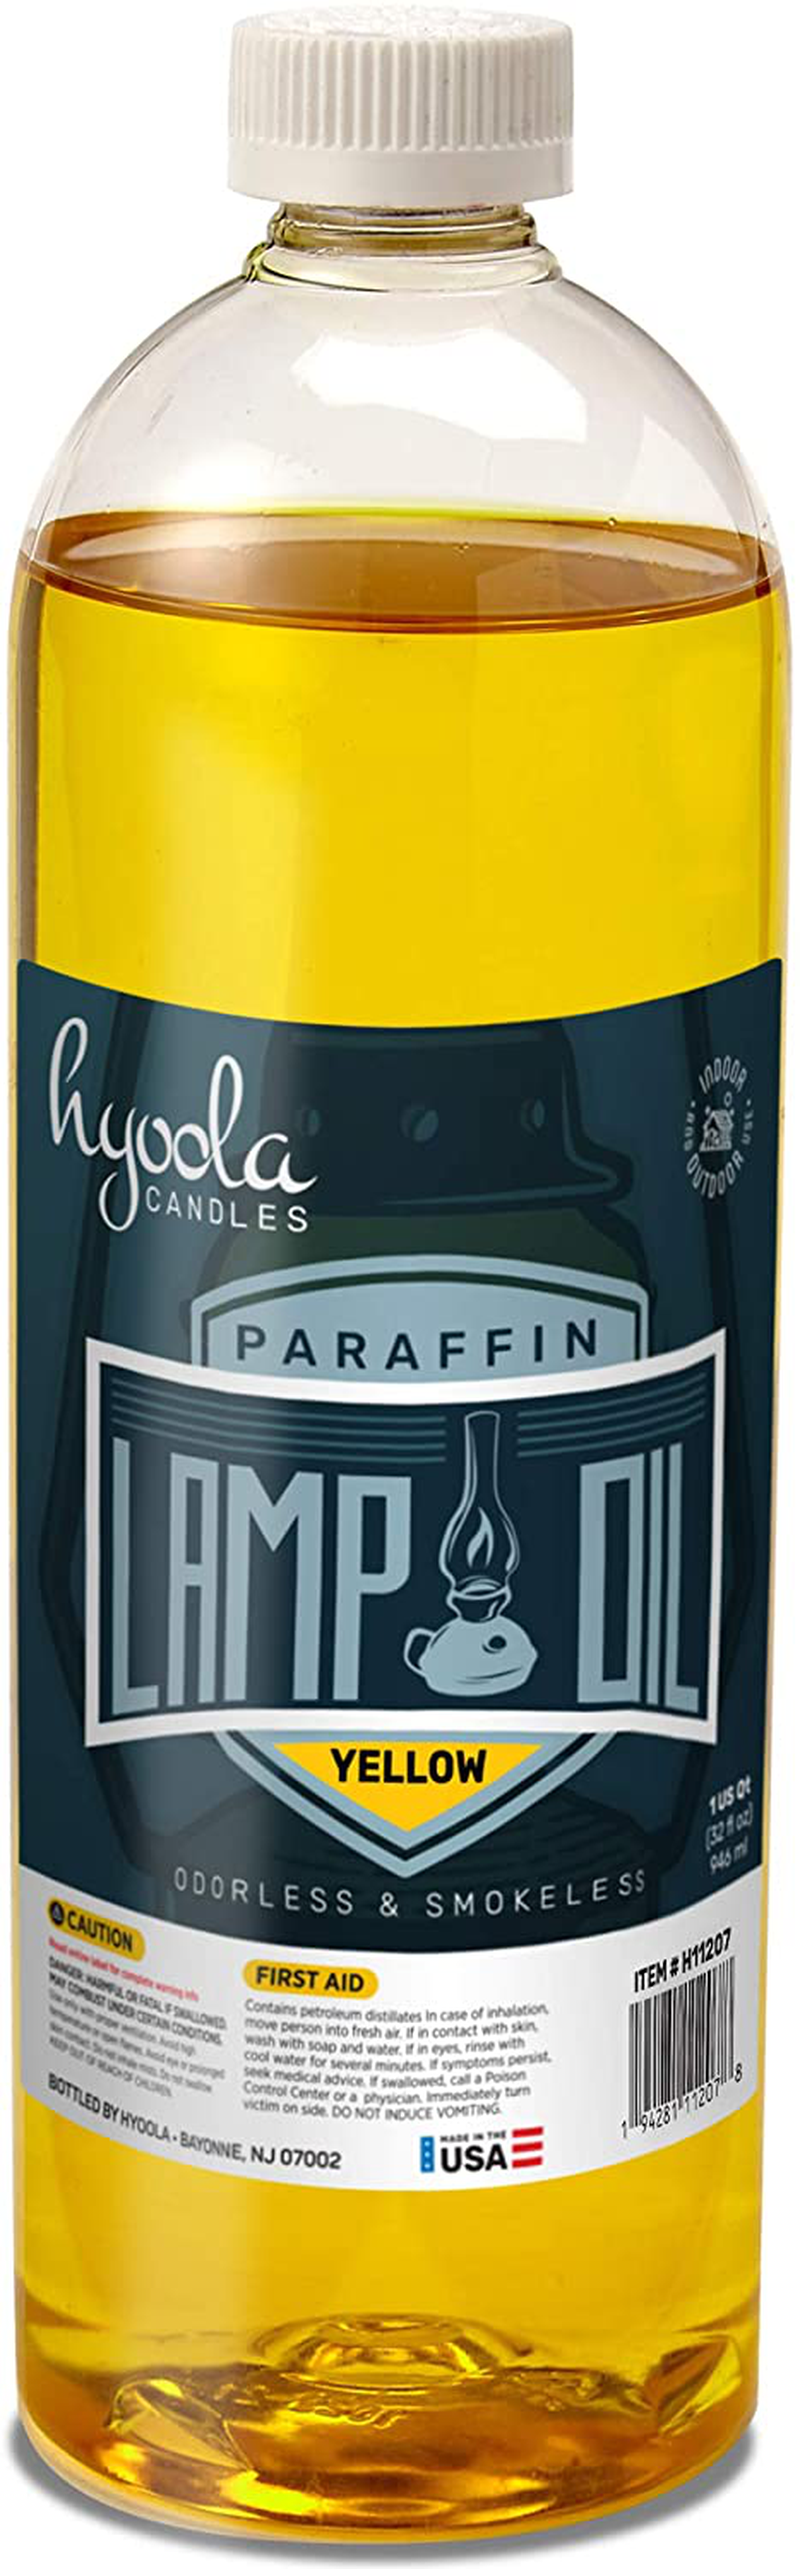 Liquid Paraffin Lamp Oil - Yellow Smokeless, Odorless, Ultra Clean Burning Fuel for Indoor and Outdoor Use - Highest Purity Available - 32oz - by Hyoola Candles Home & Garden > Lighting Accessories > Oil Lamp Fuel Hyoola Candles Default Title  